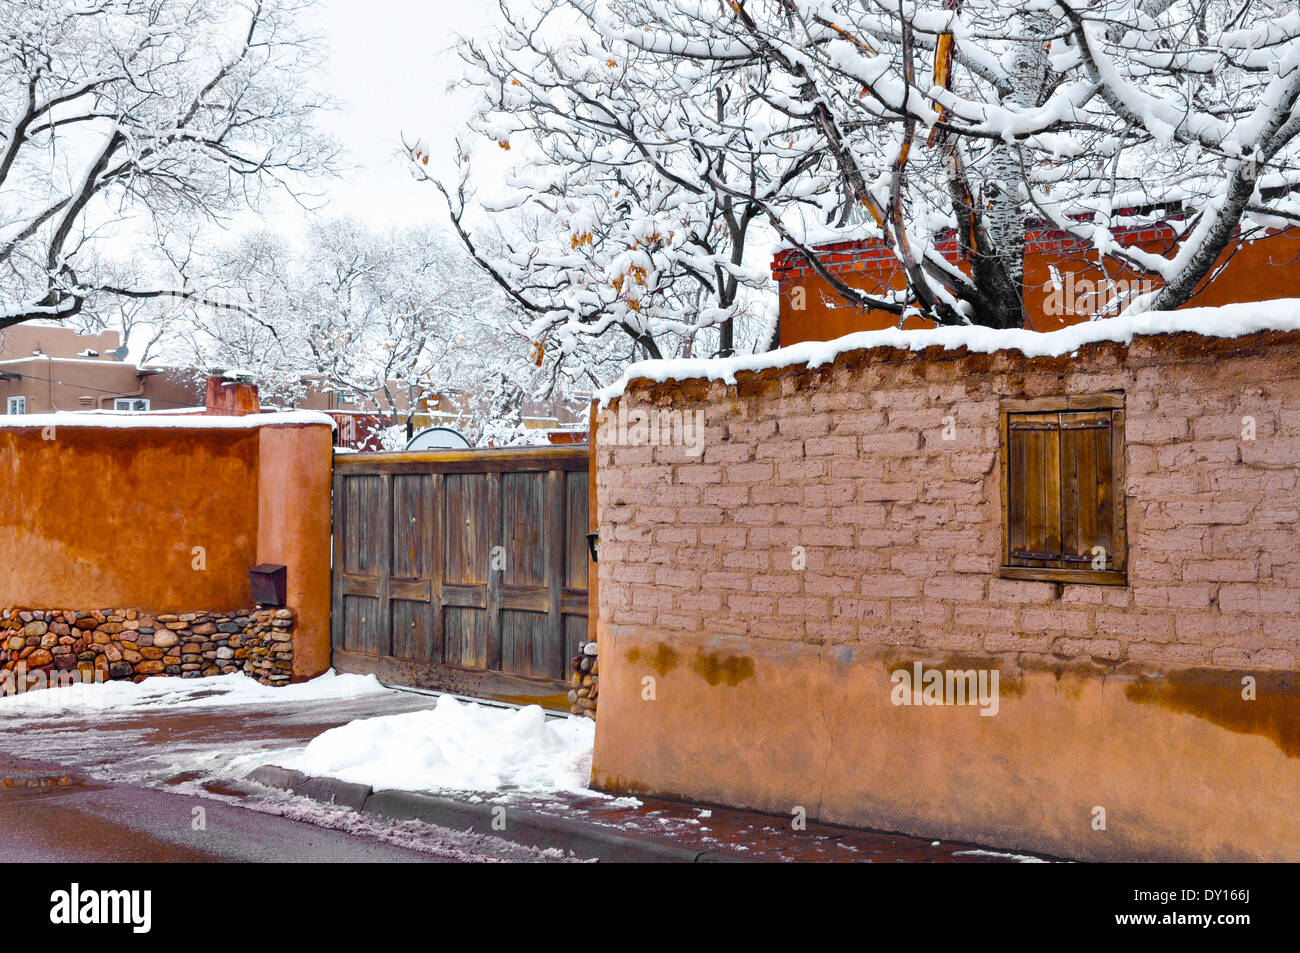 A winter's snow scene features old and new adobe walls and wooden gate in tree laden Canyon Road area of Santa Fe, NM Stock Photo